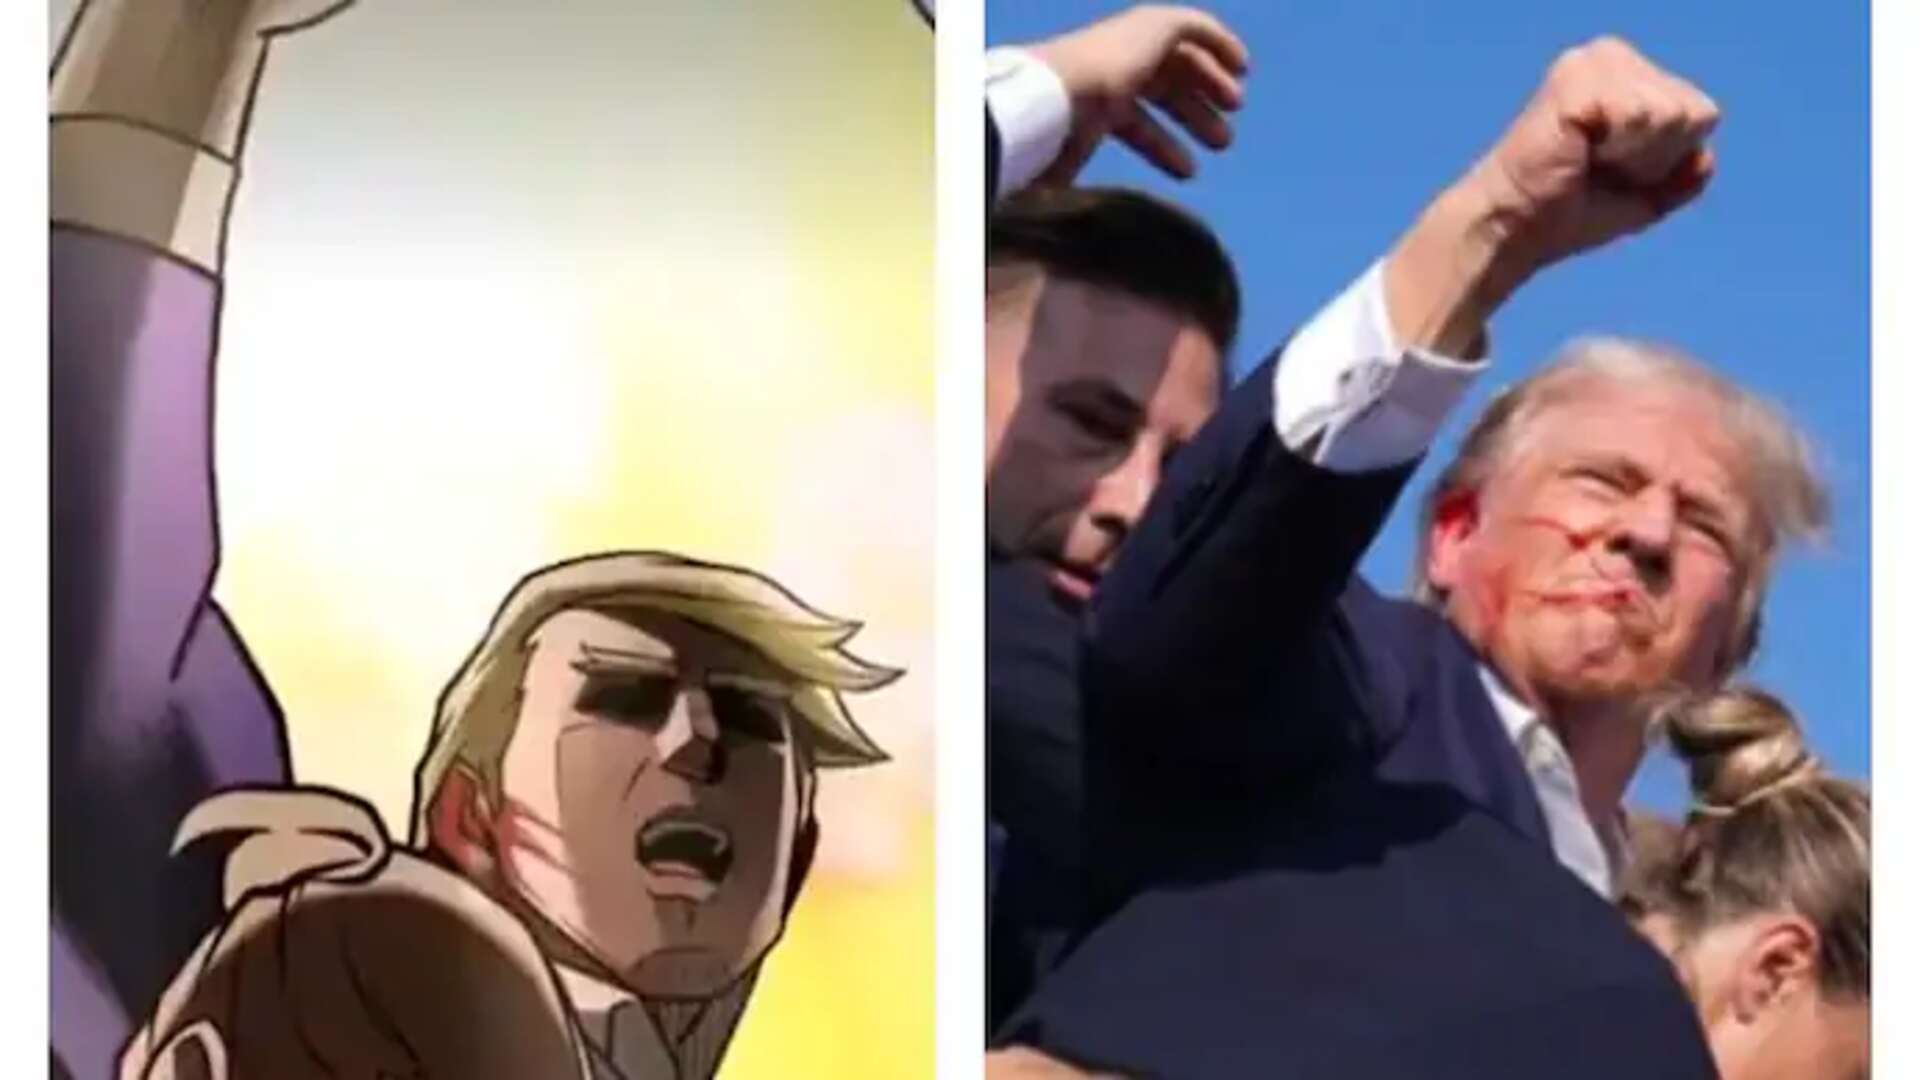 Viral Anime Shows Trump’s Assassination Attempt on Chinese Social Media